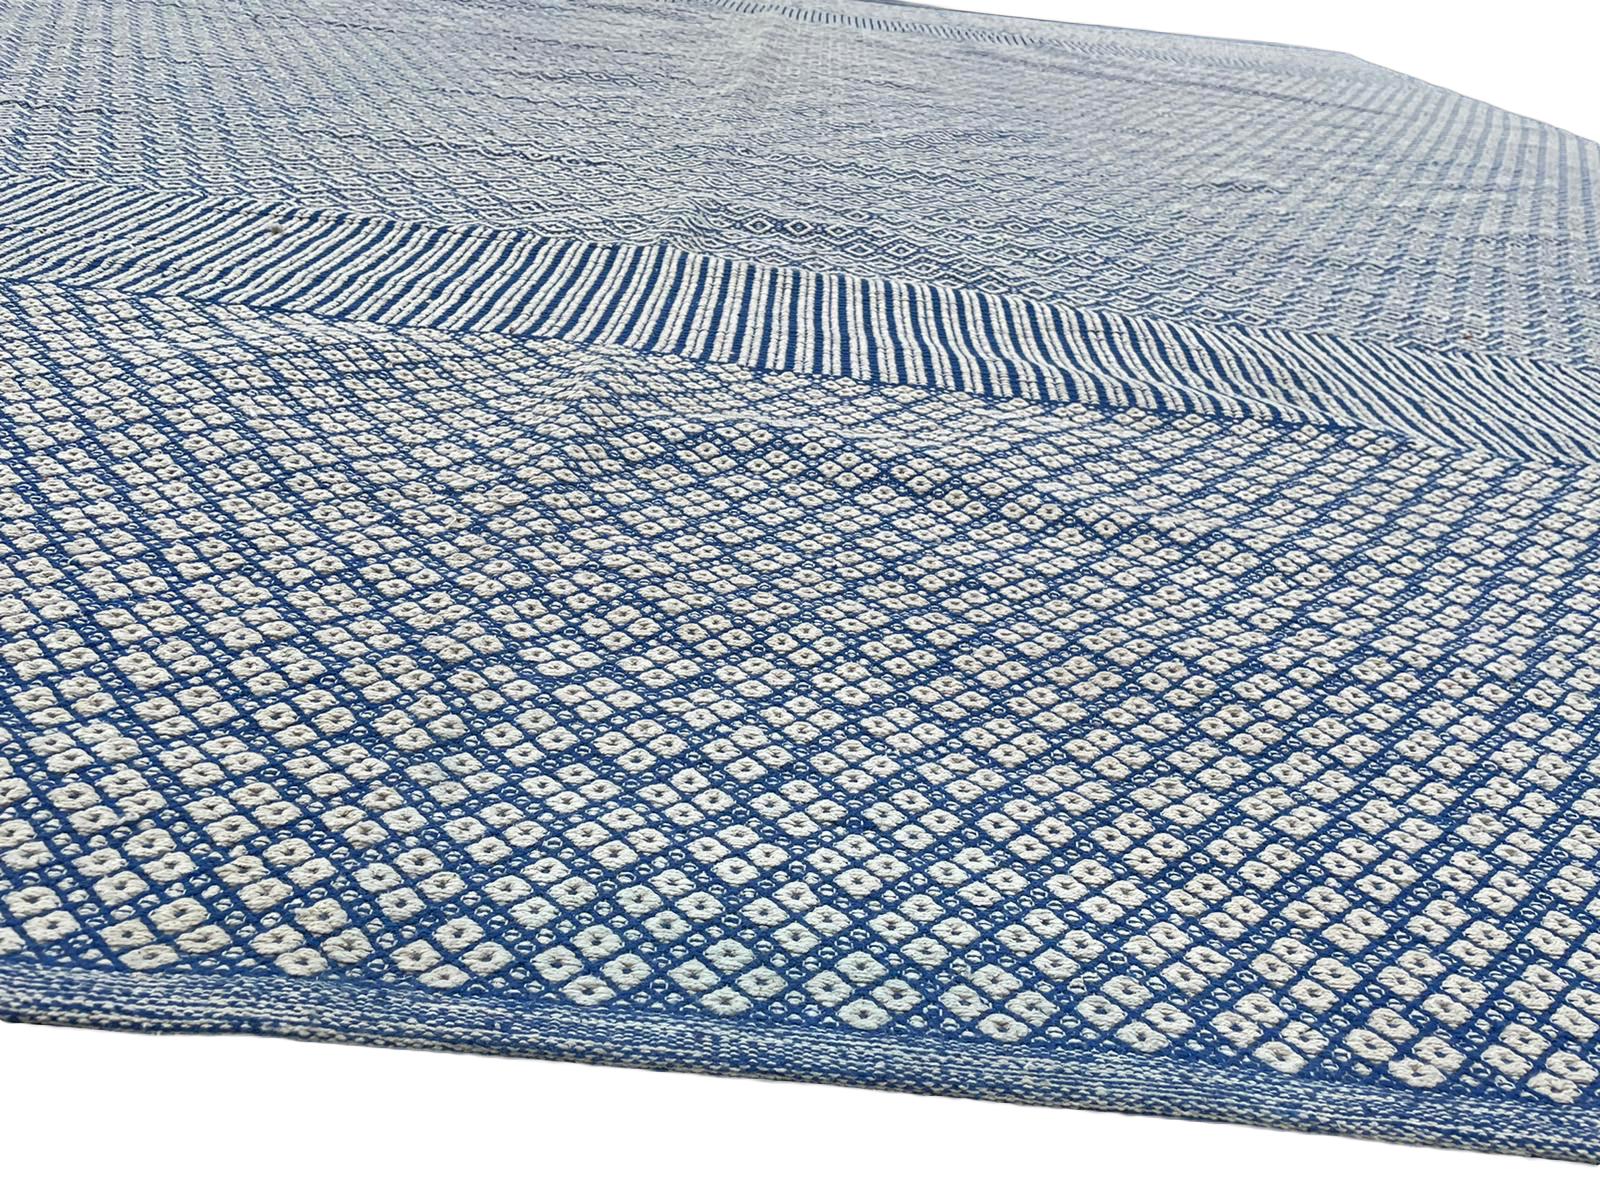 Oversized Blue and White Flat-Weave Indian Kilim by Gordian Rugs 11